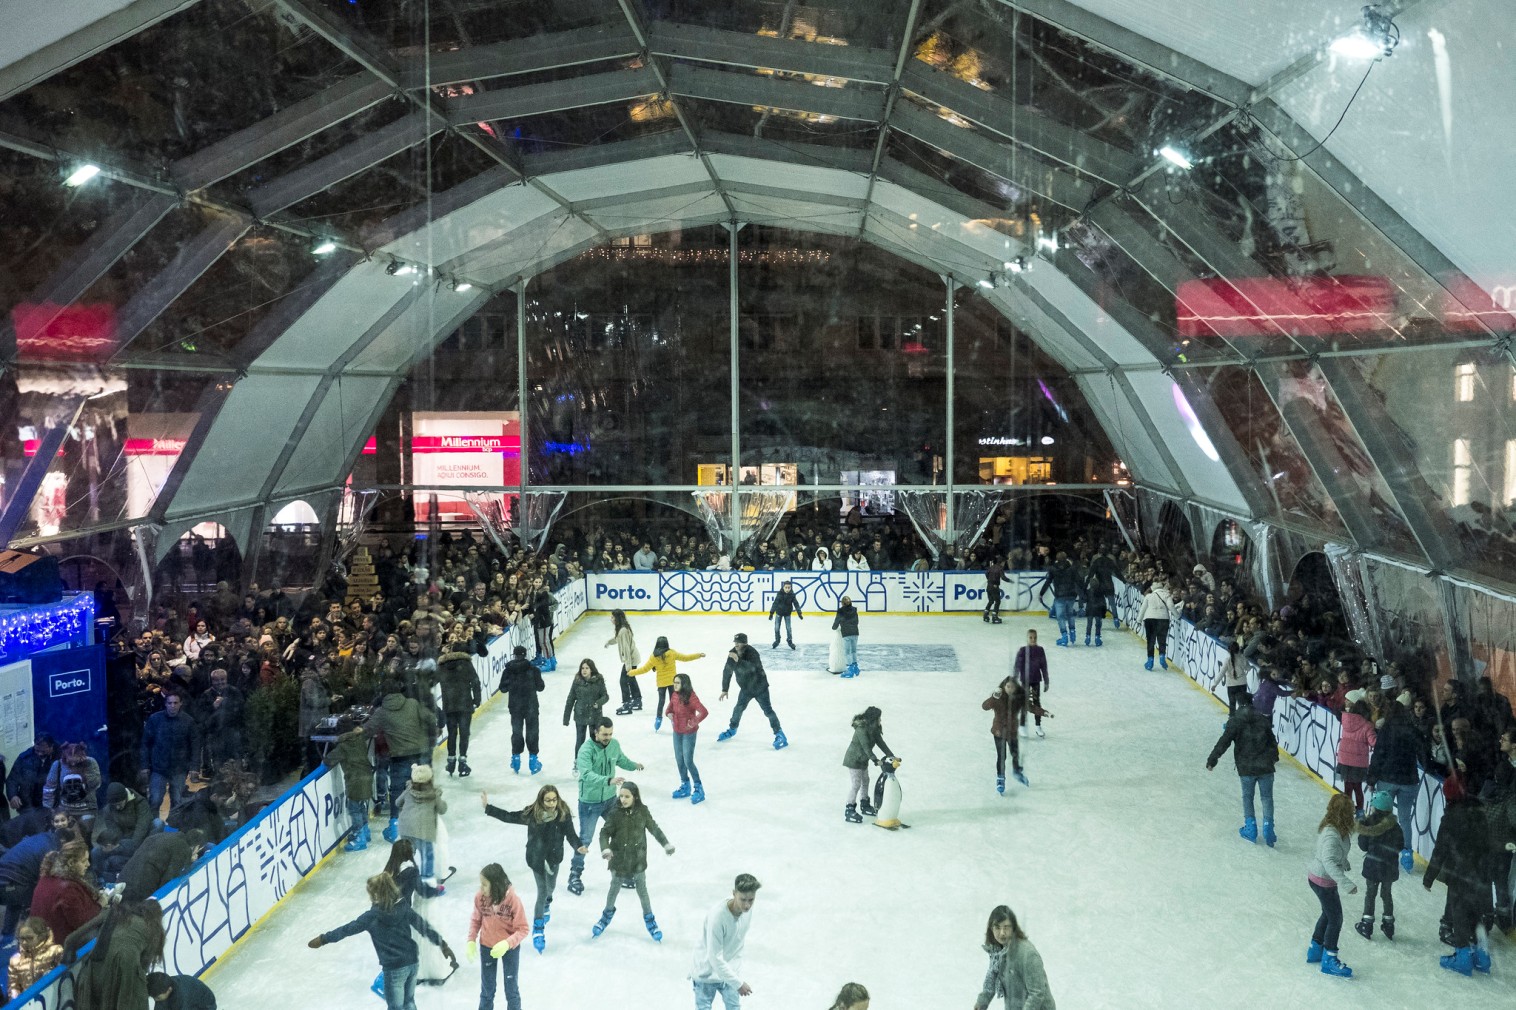 Natural ice rink - Event